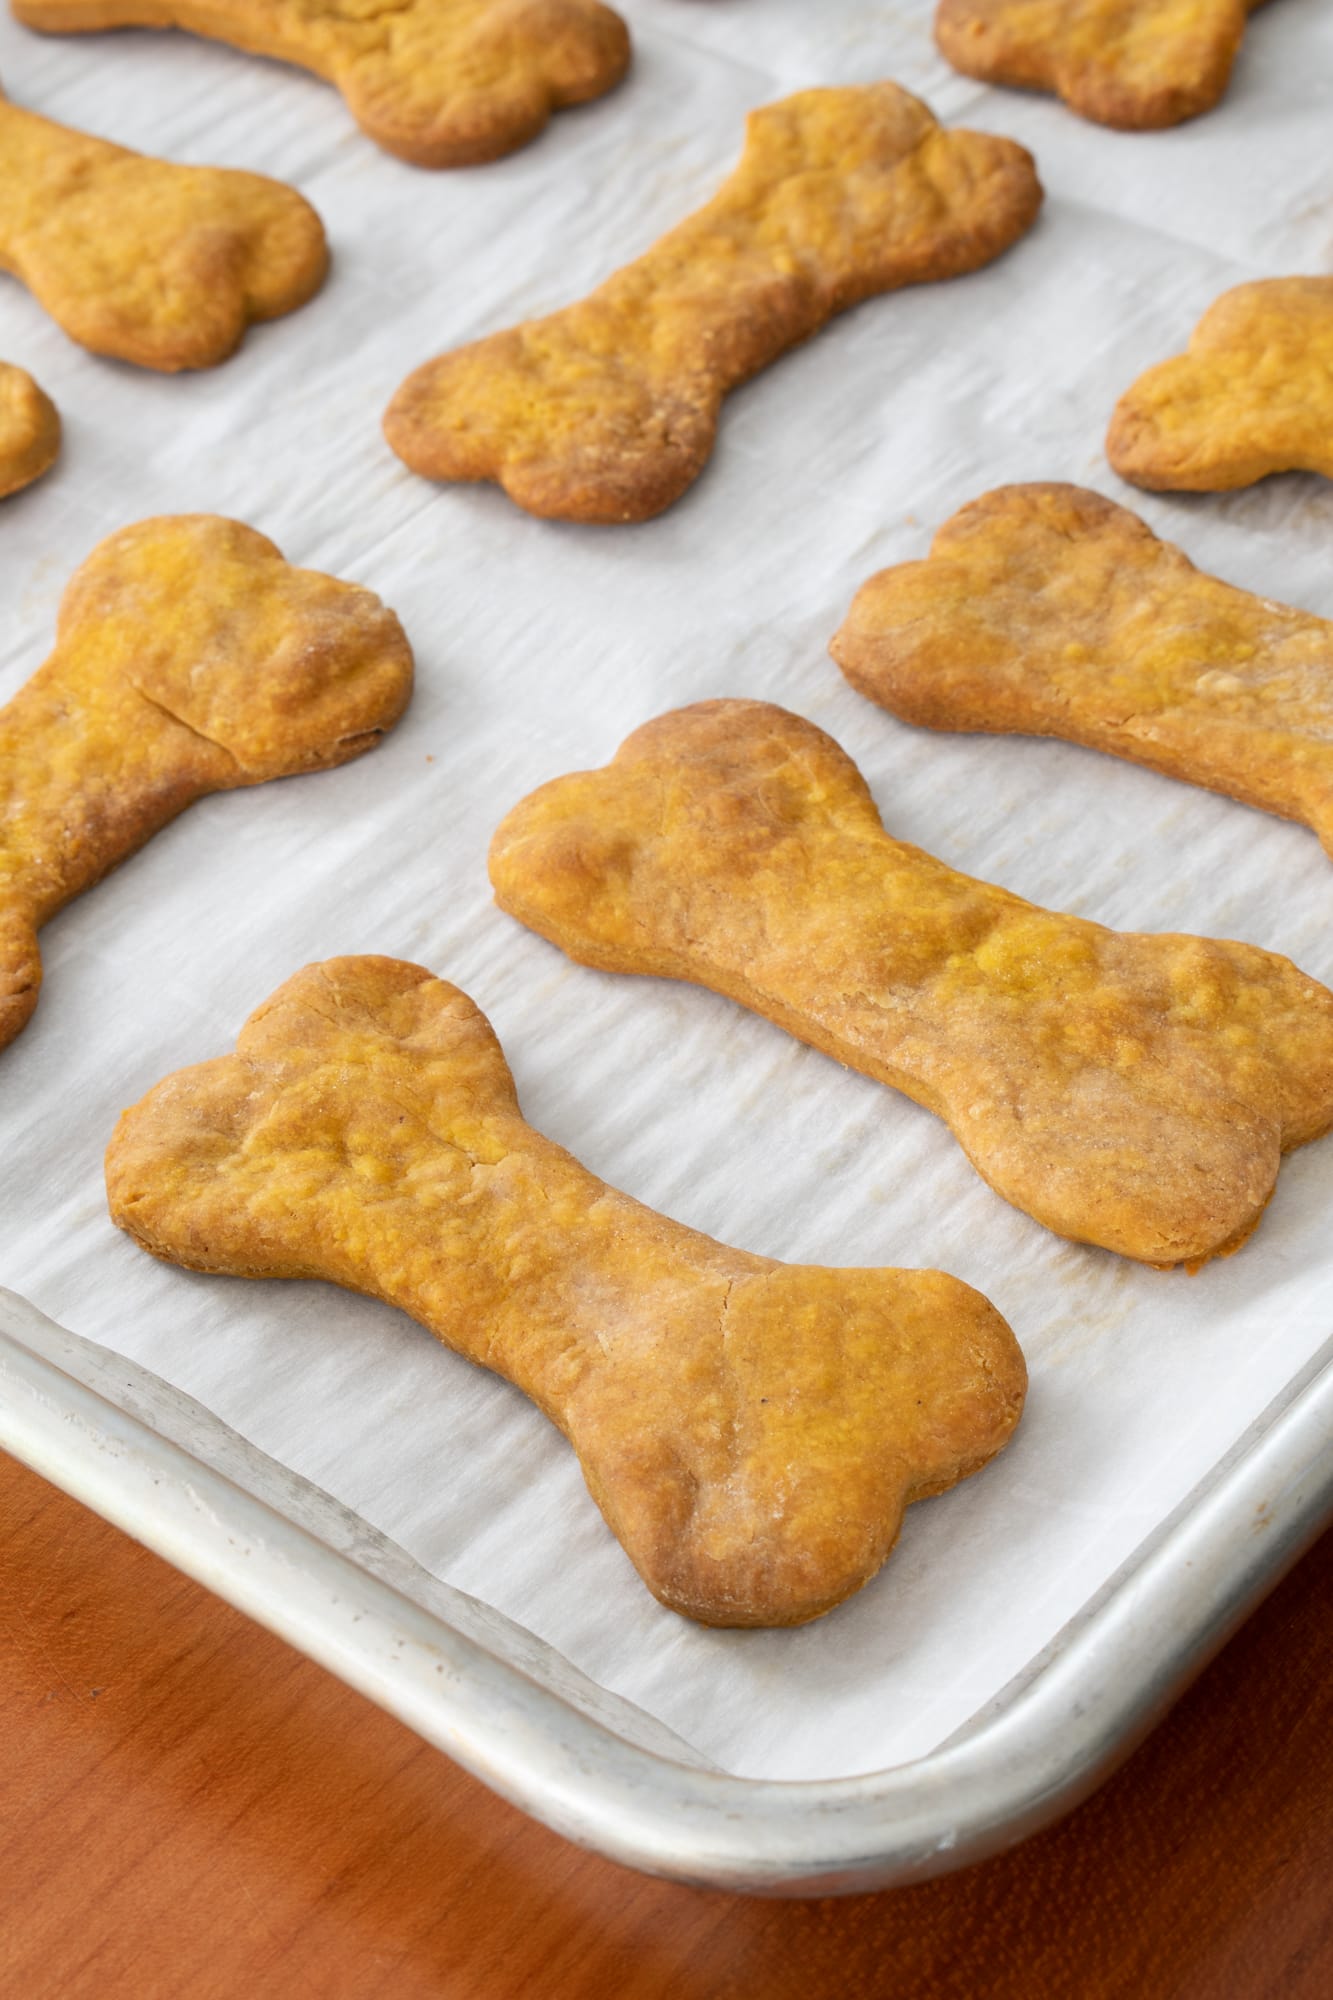 3 Ingredient Ridiculously Simple Pumpkin Dog Treats